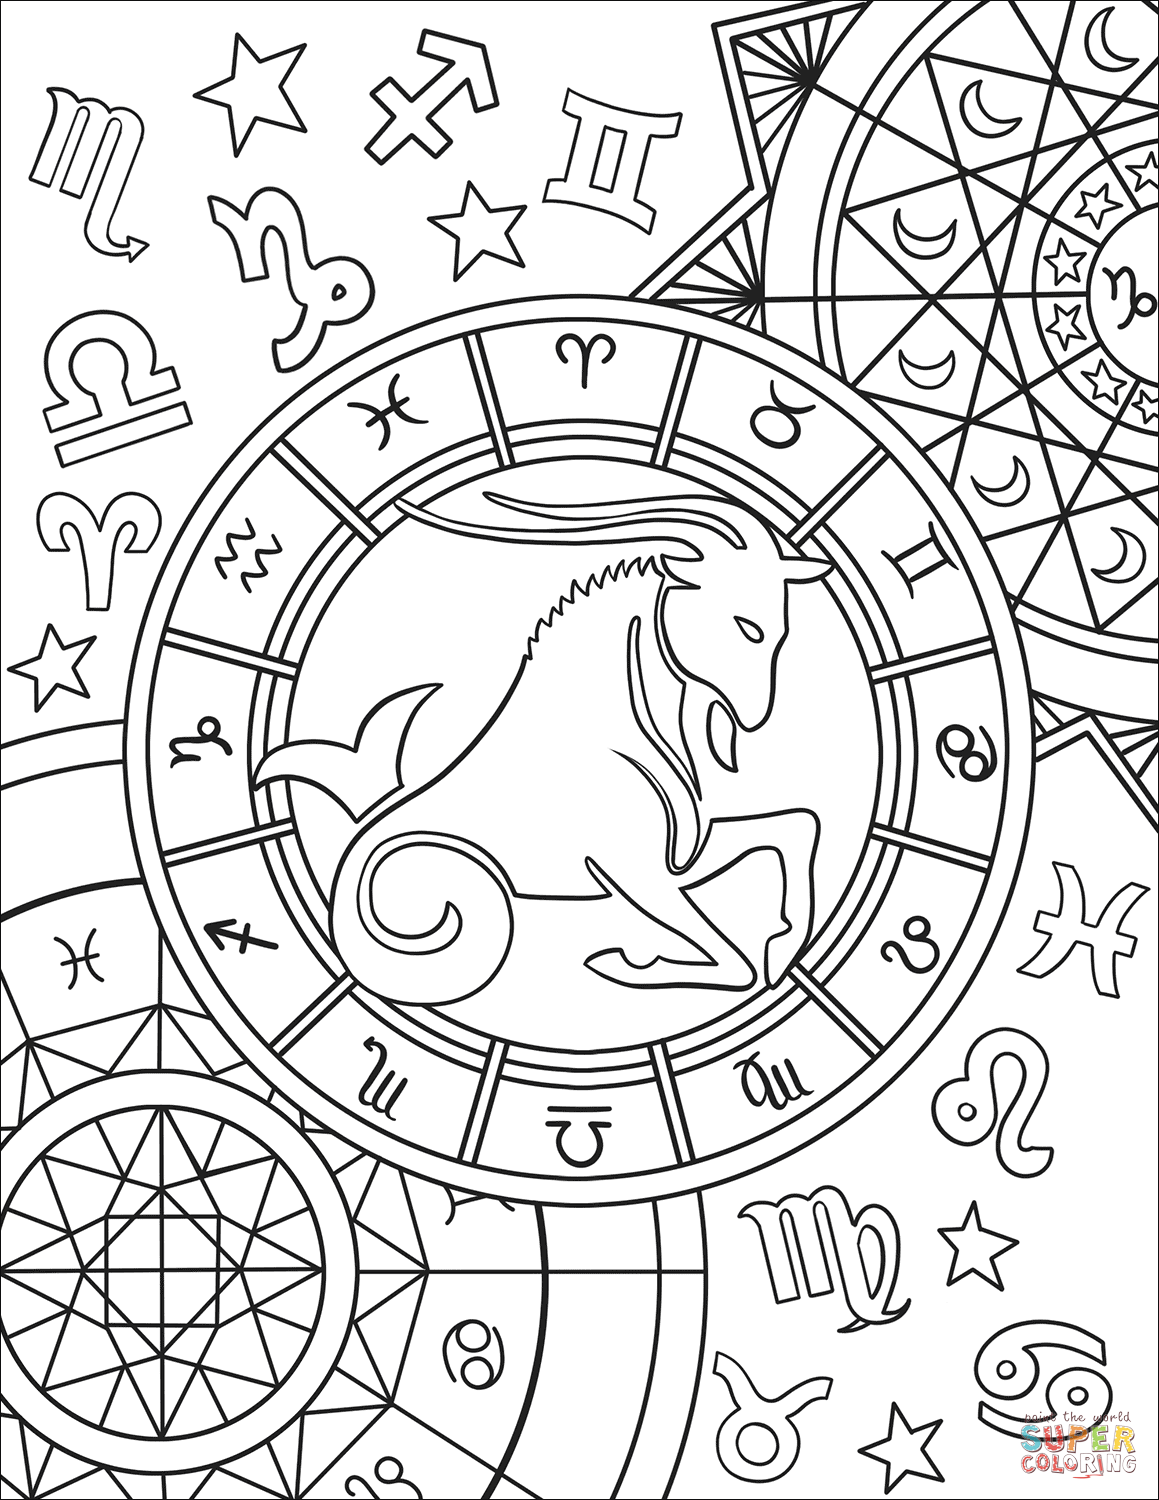 Capricorn Zodiac Sign Coloring Page Free Printable 